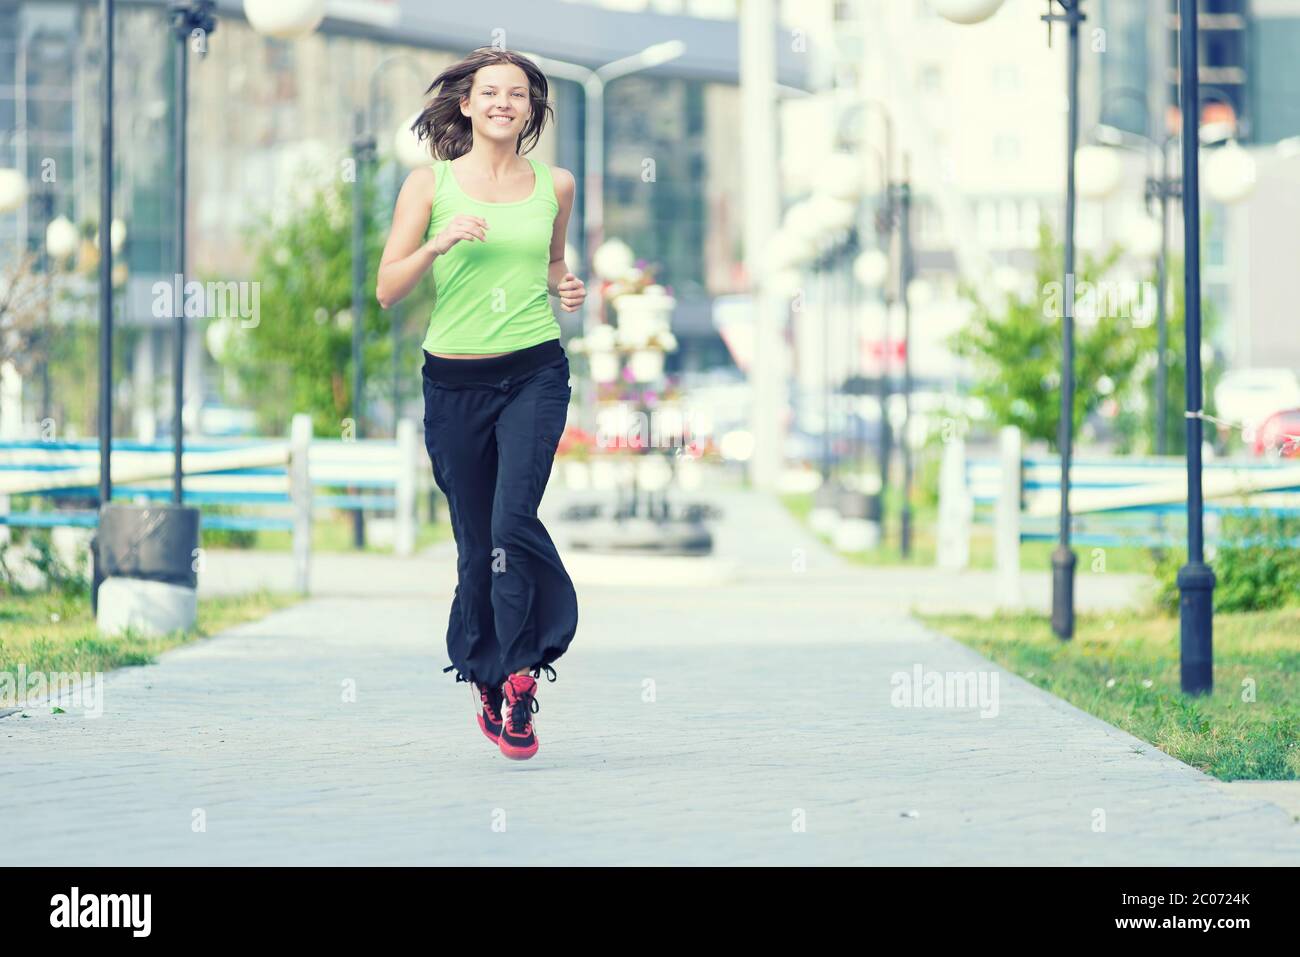 Woman jogging in city street park. Stock Photo